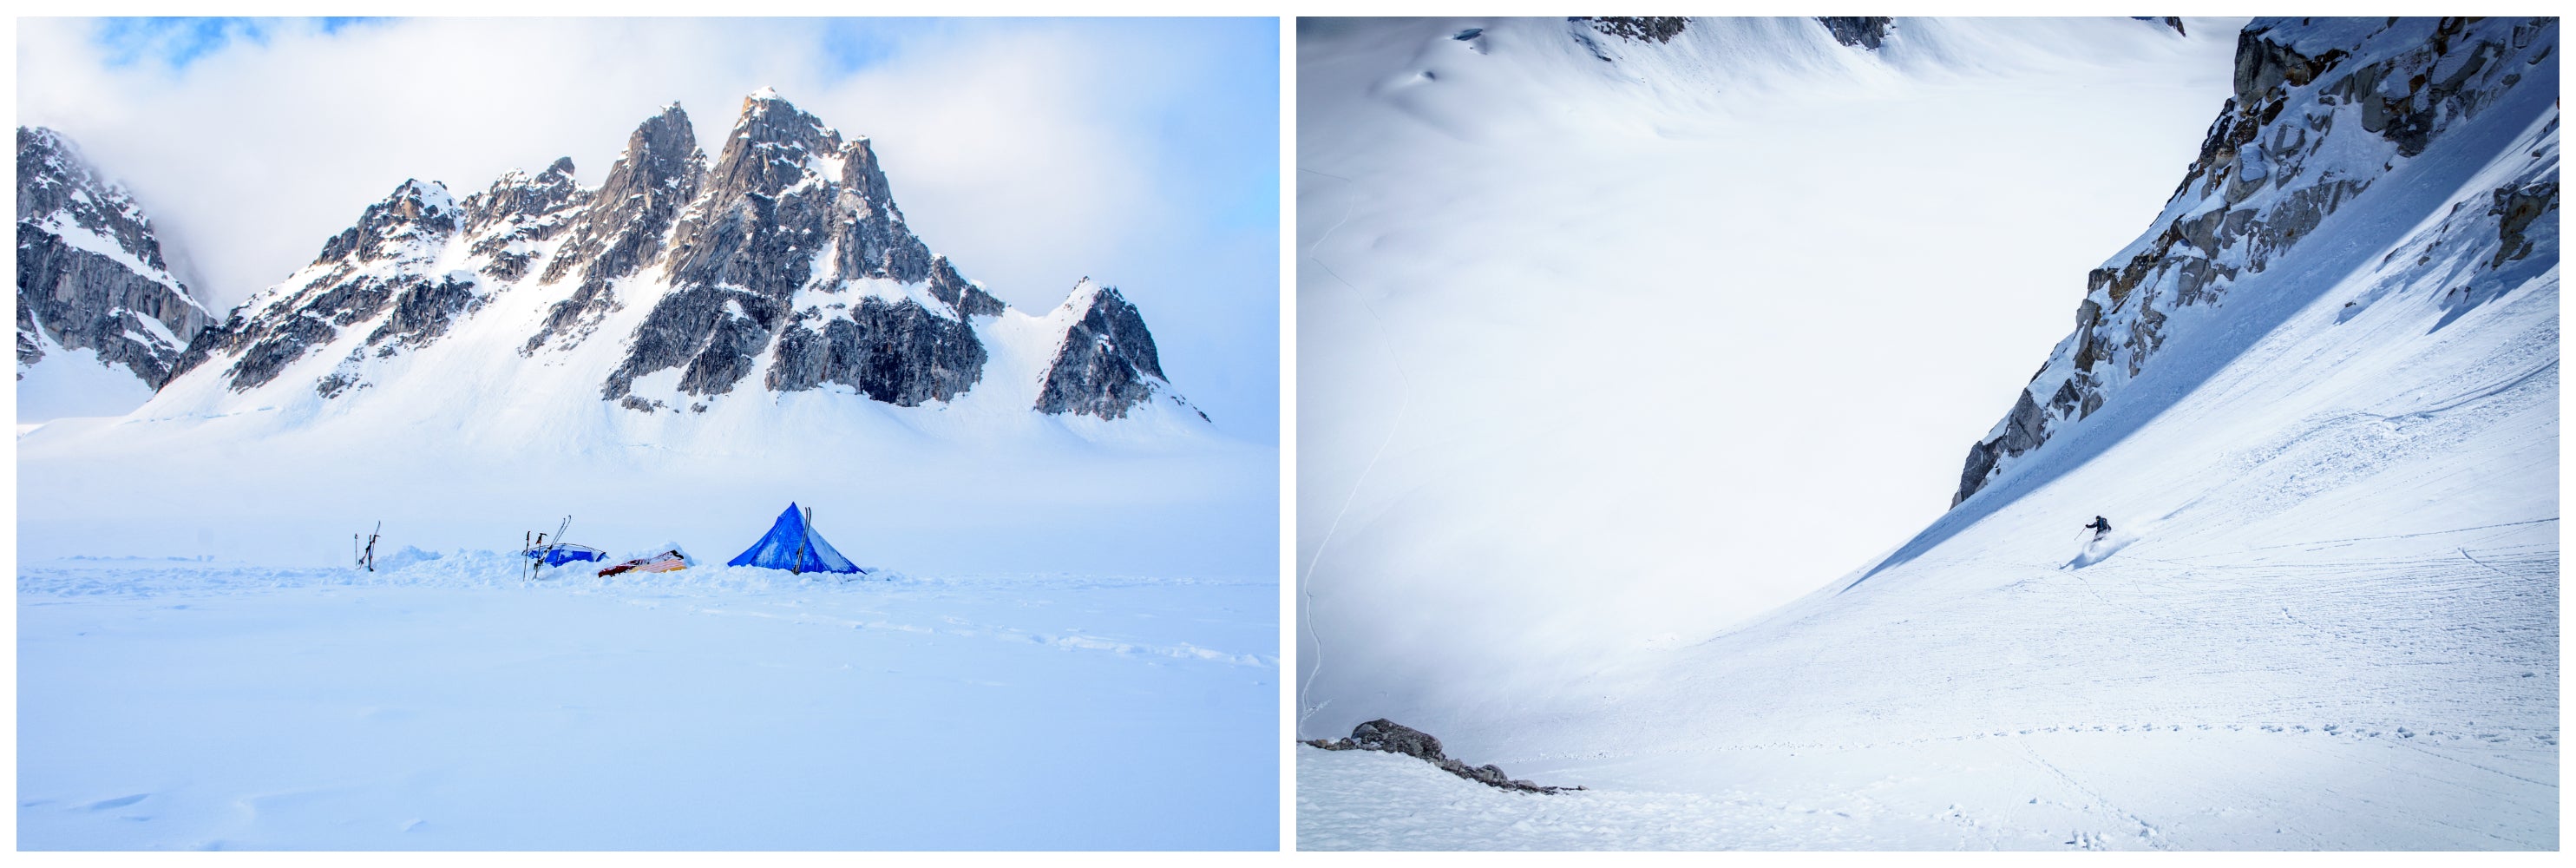 Collage of Adam and Caleb's base camp setup underneath the jagged mountains of the Alaskan Range, and Adam skiing down a steep couloir overlooking Pika Glacier.